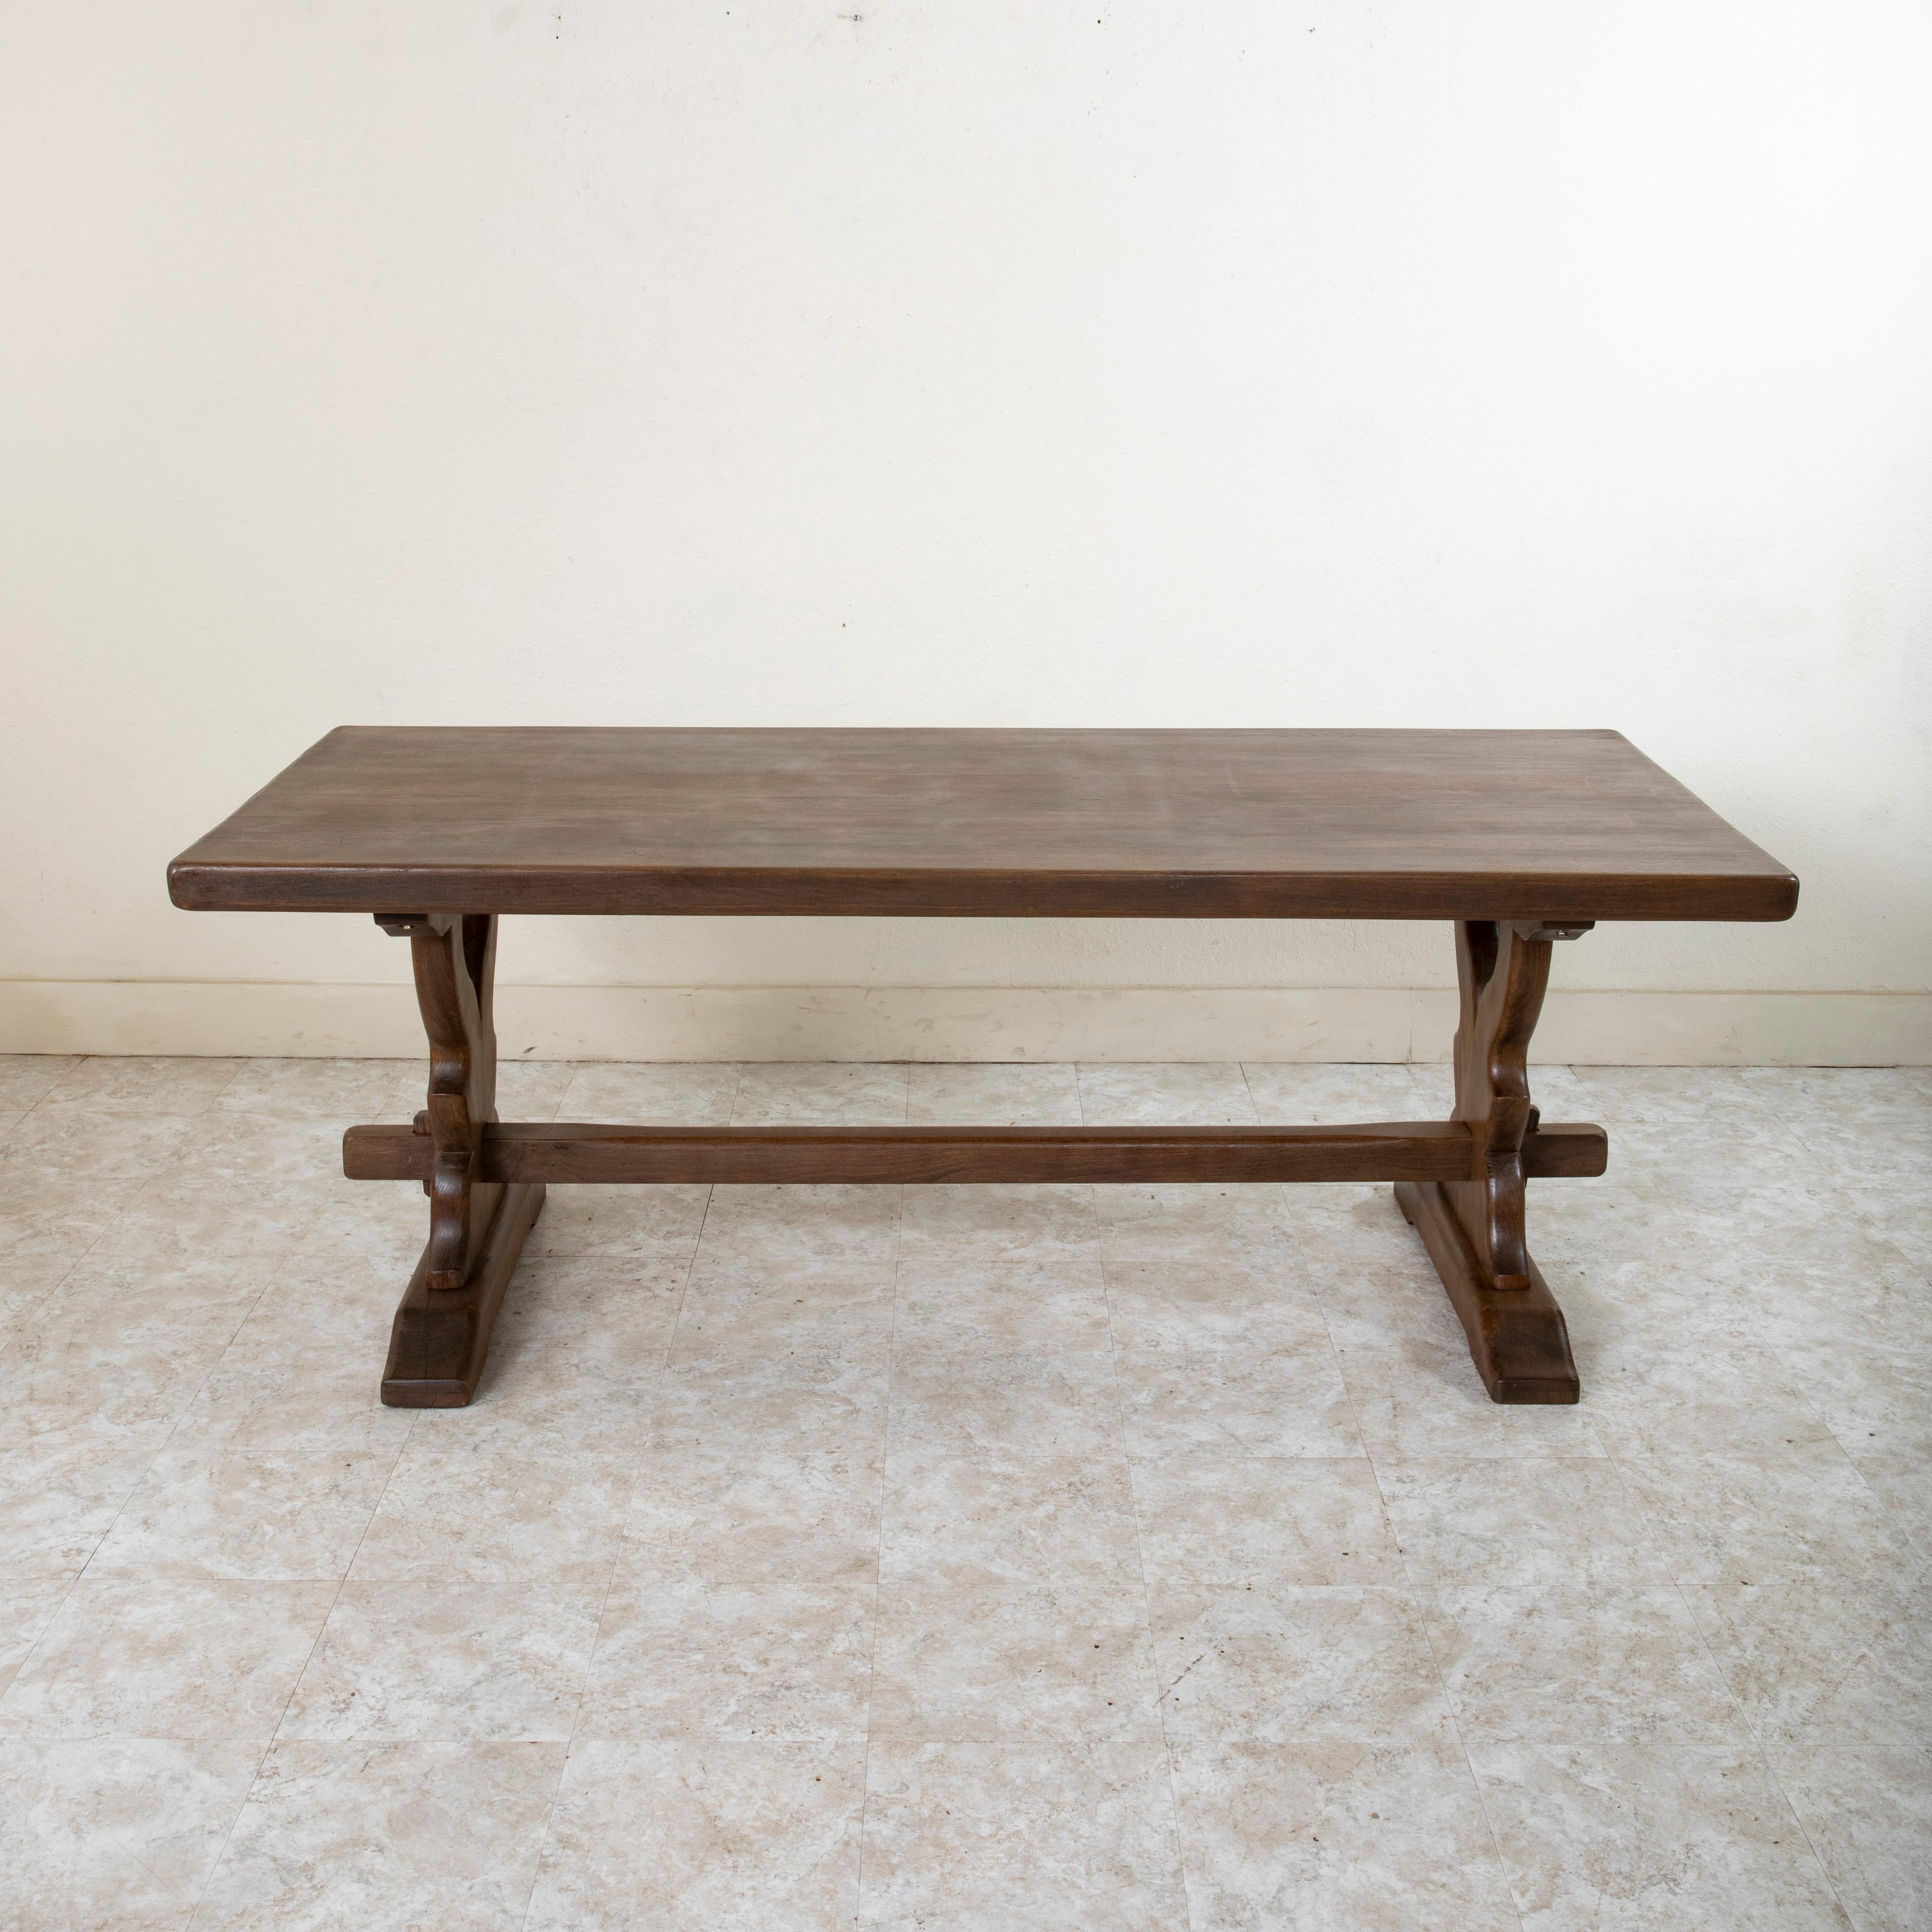 Found in the region of Normandy, France, this large artisan-made oak monastery table or dining table from the turn of the twentieth century features an impressive 2.5 inch thick top constructed of seven planks of wood. The table rests on a sturdy